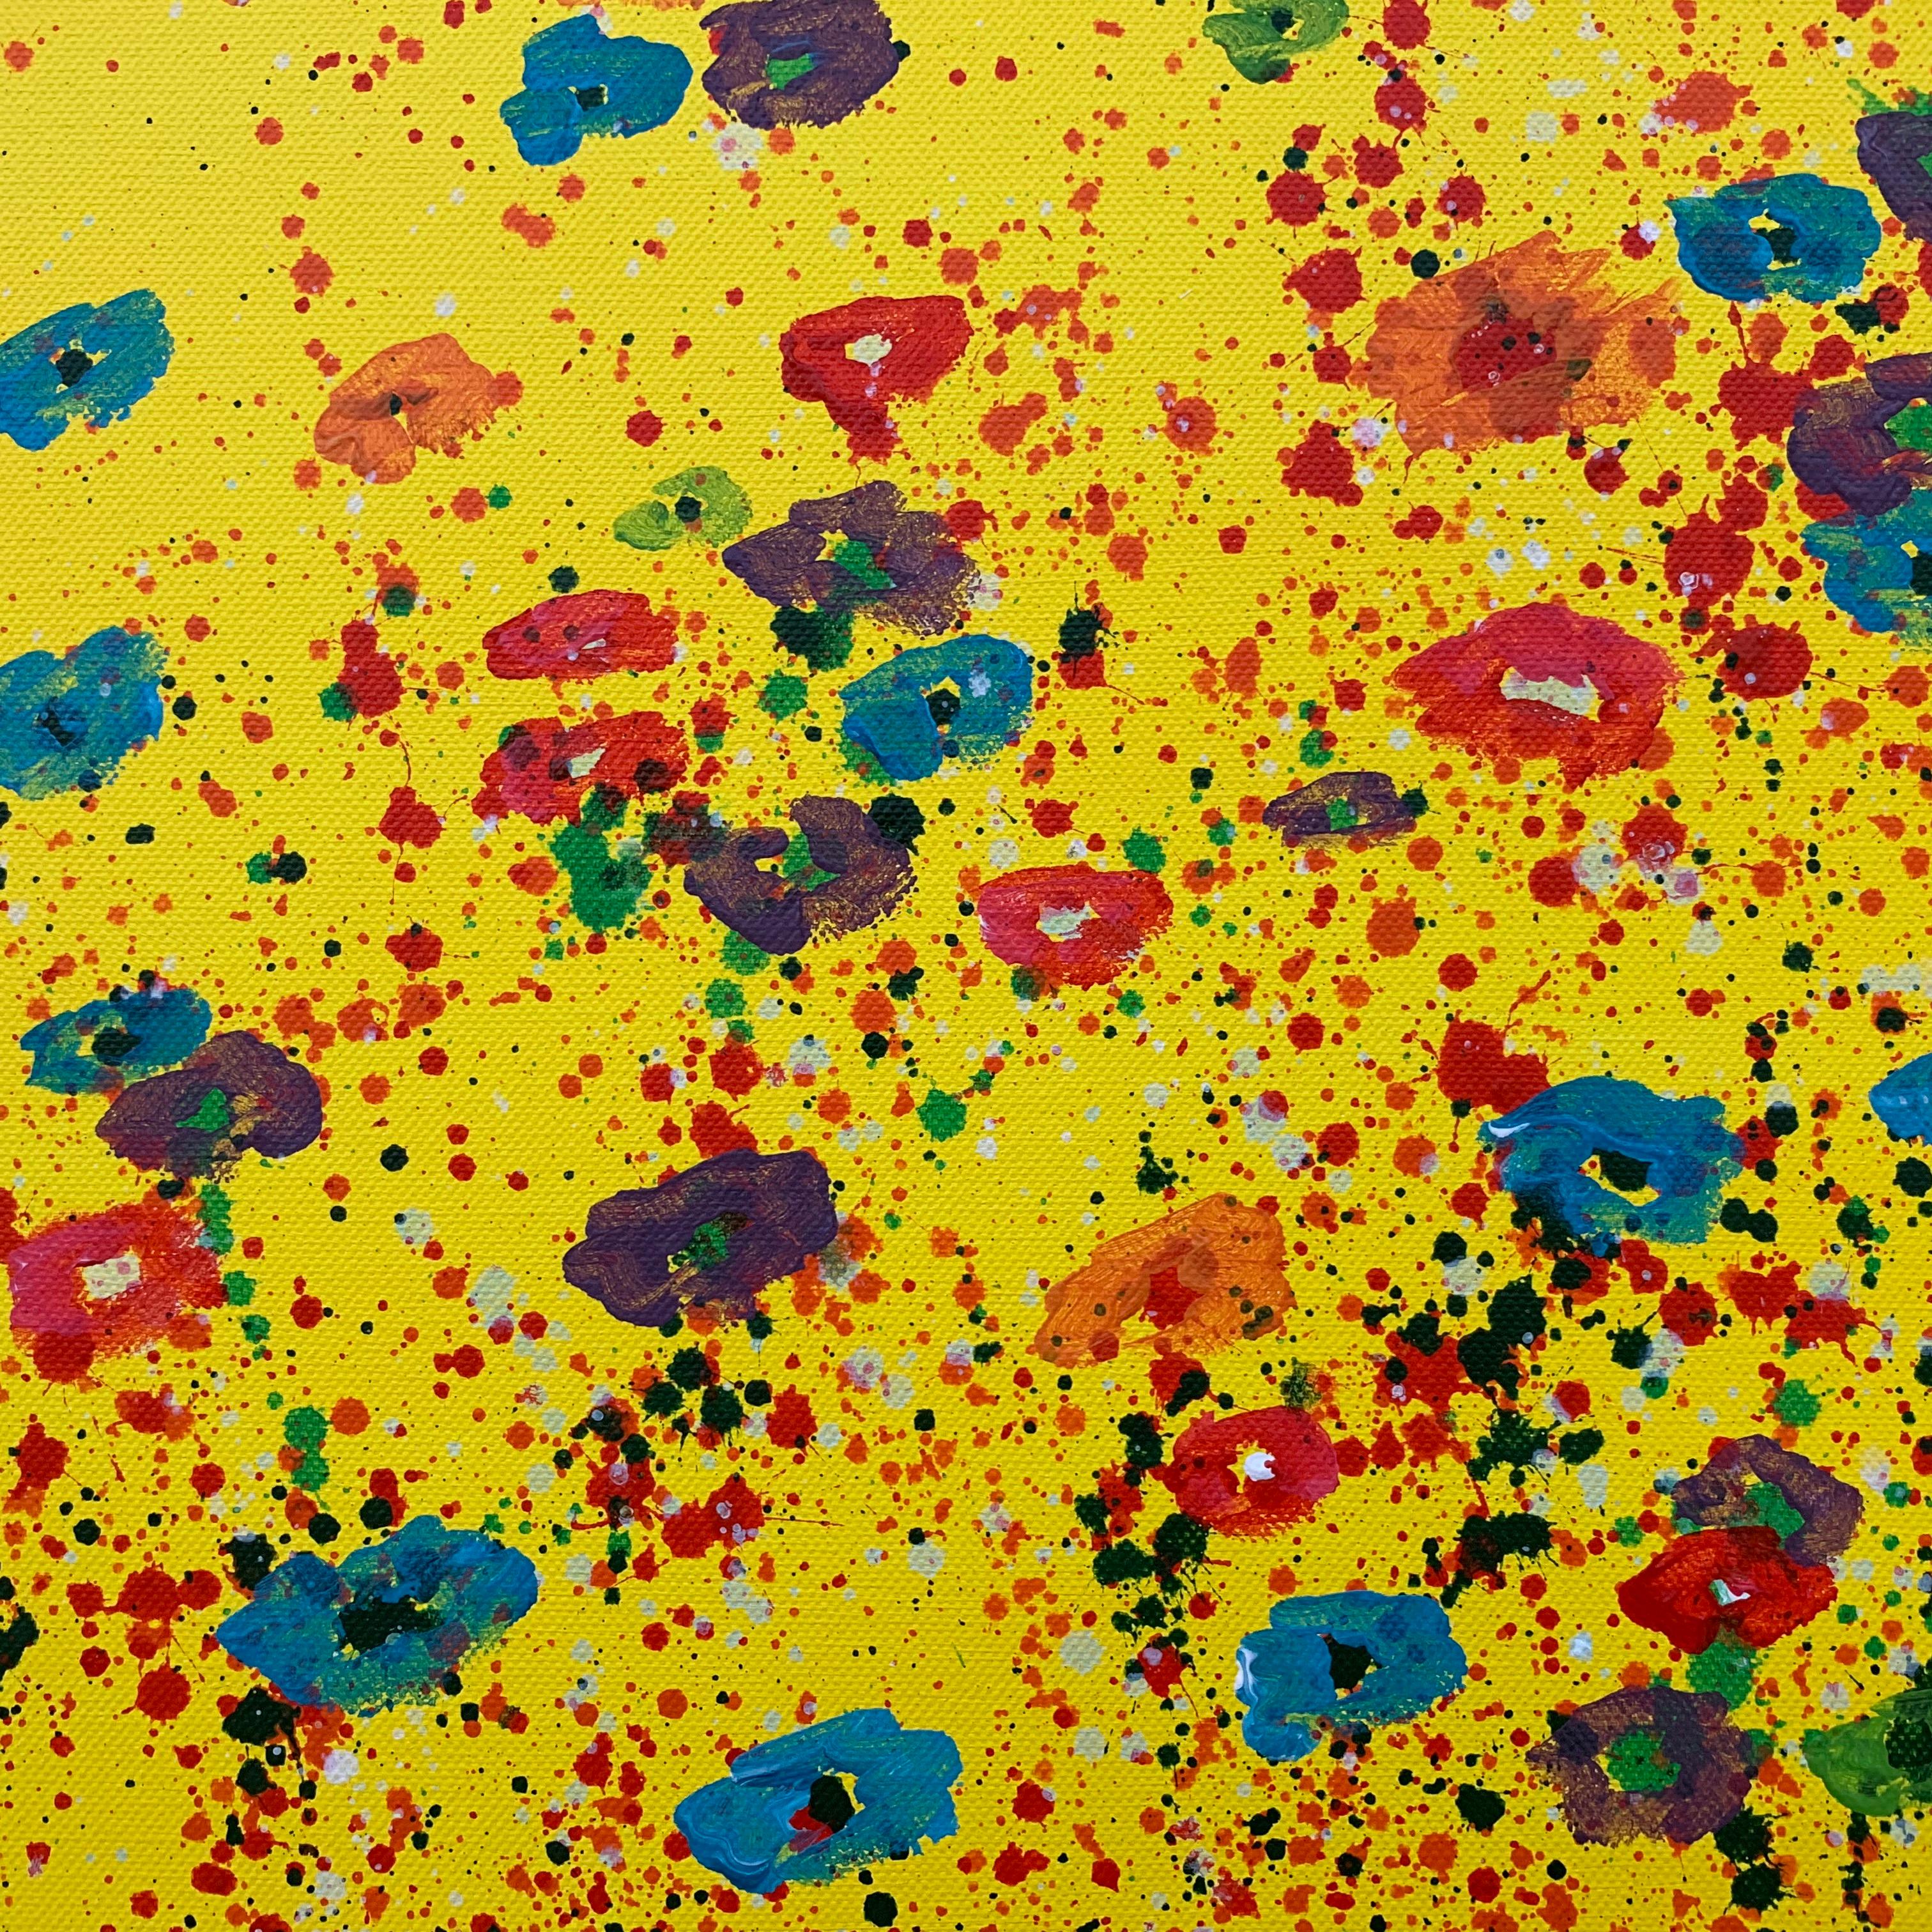 Abstract Red Pink Blue Flowers on Yellow Background by British Landscape Artist For Sale 2